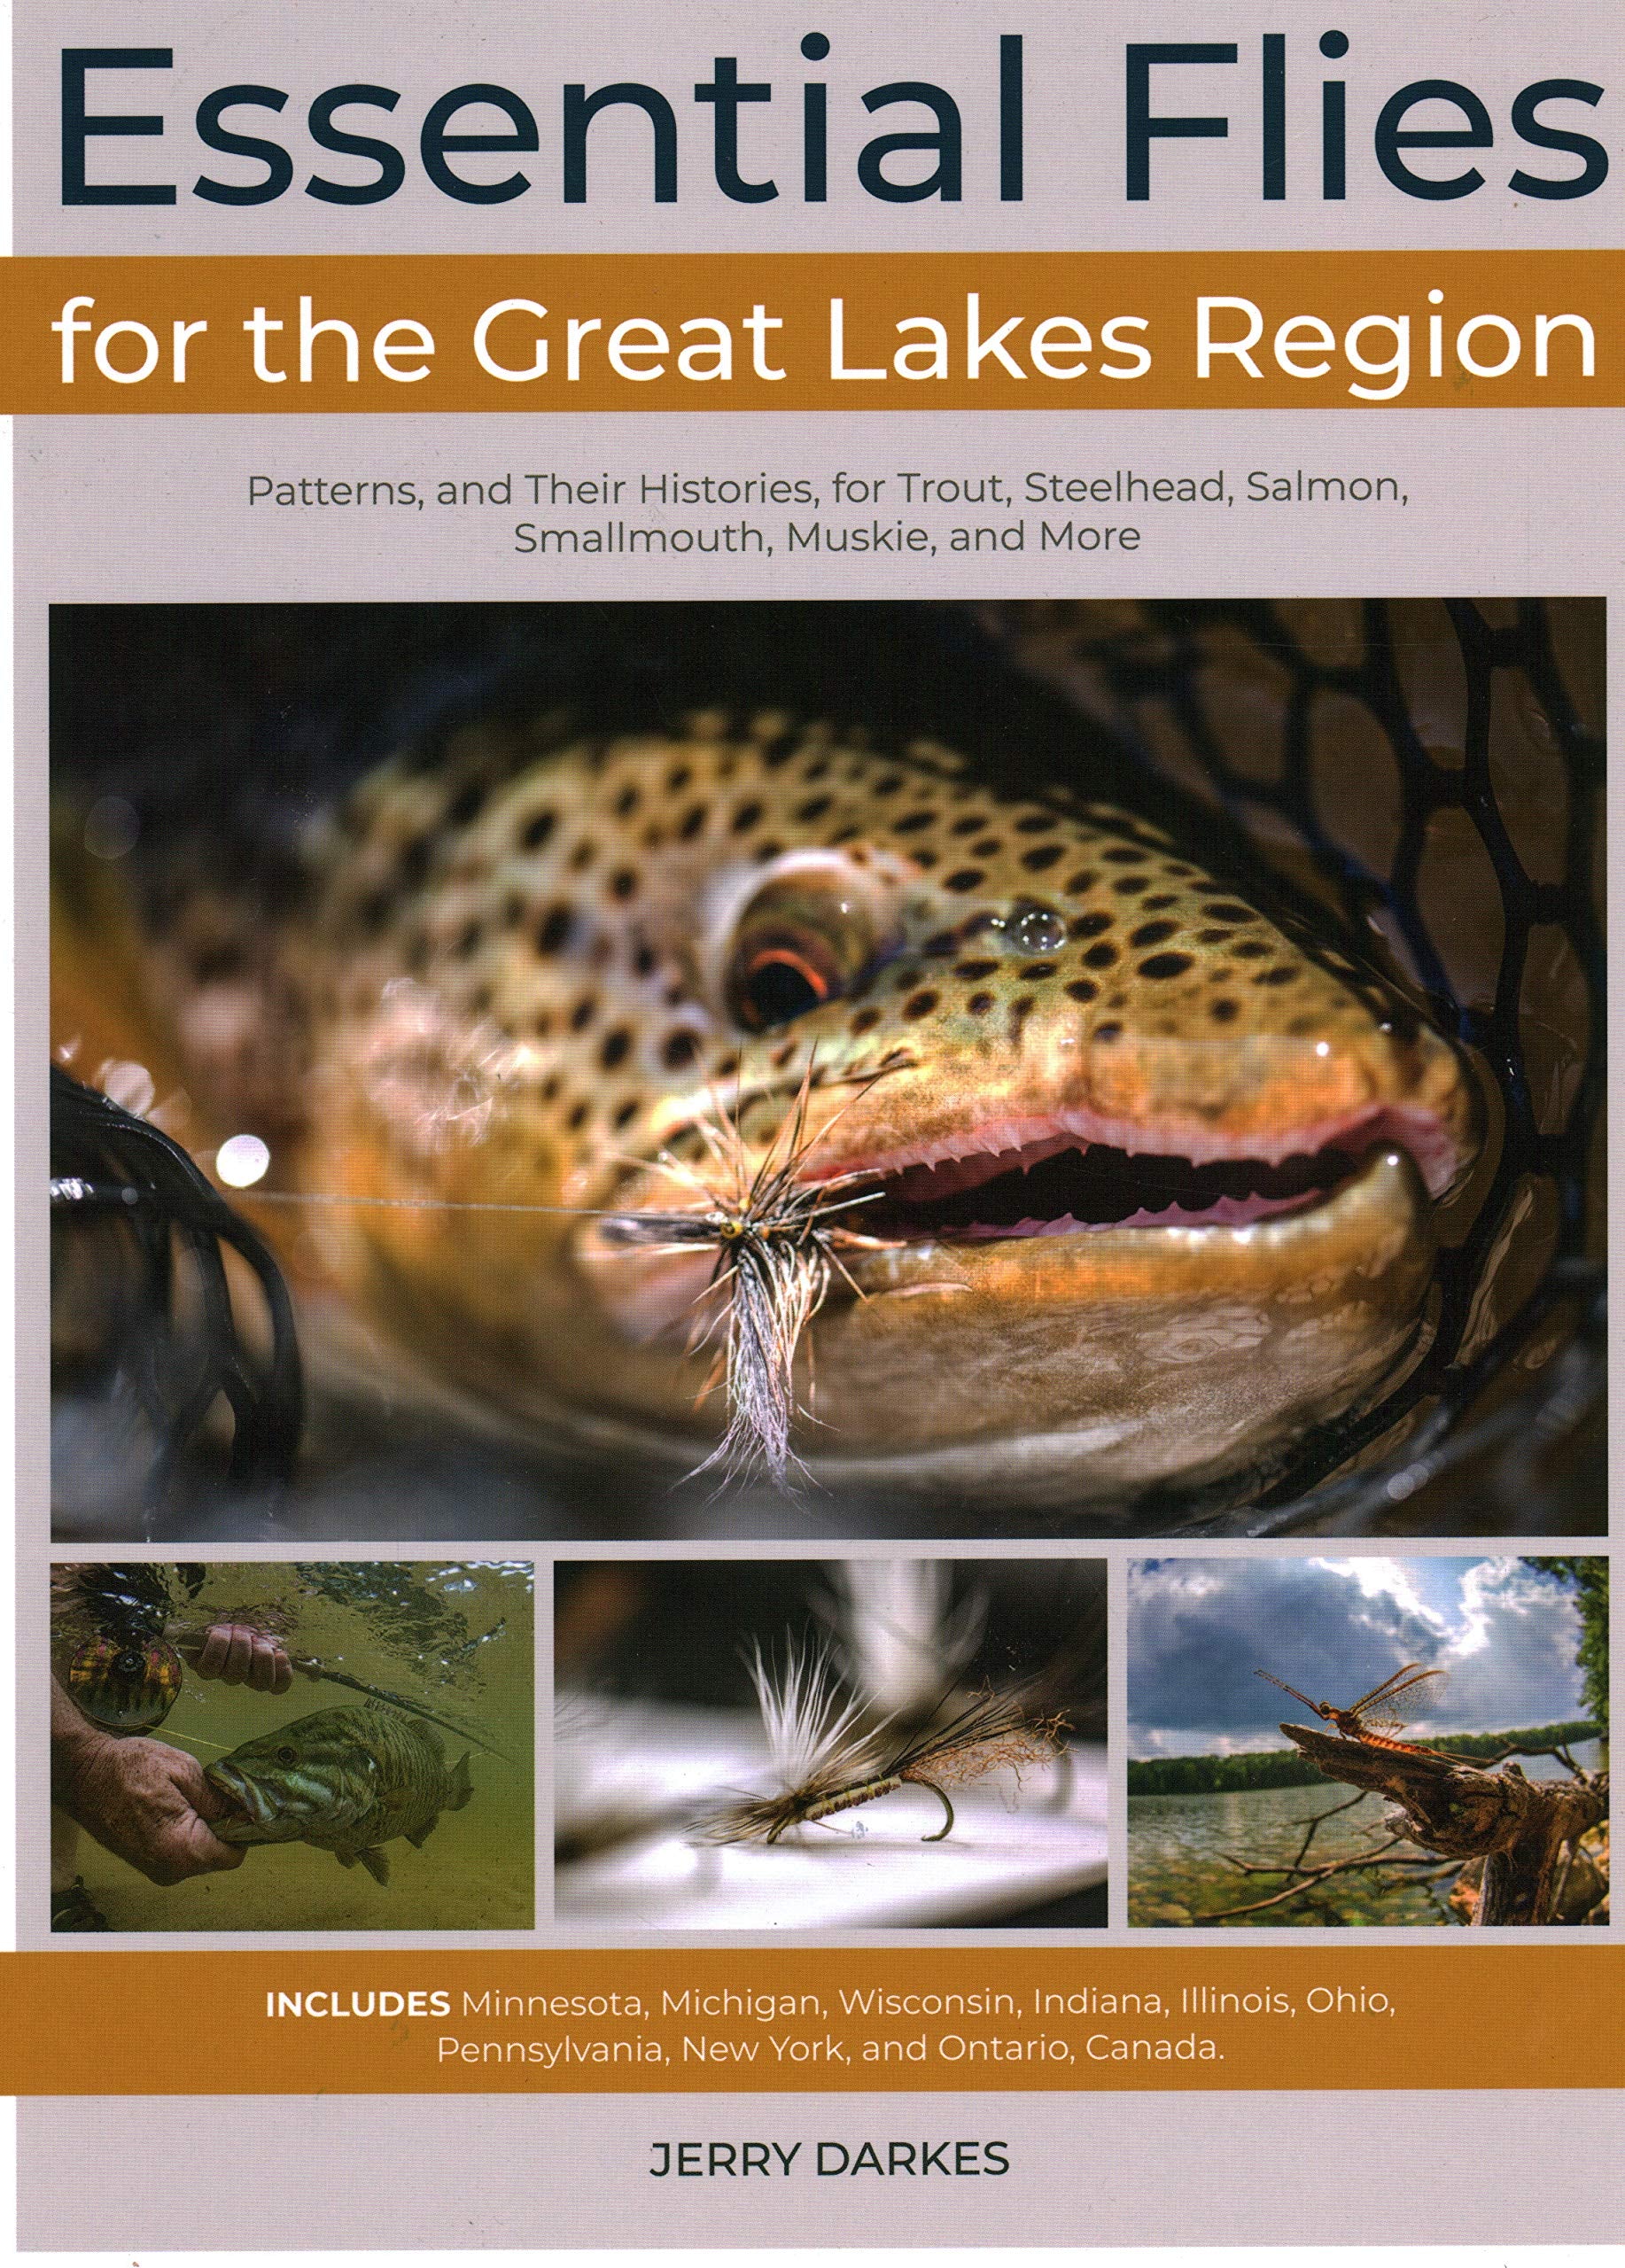 Essential Flies for the Great Lakes Region: Patterns, and Their Histories, for Trout, Steelhead, Salmon, Smallmouth, Muskie, and More By Jerry Darkes